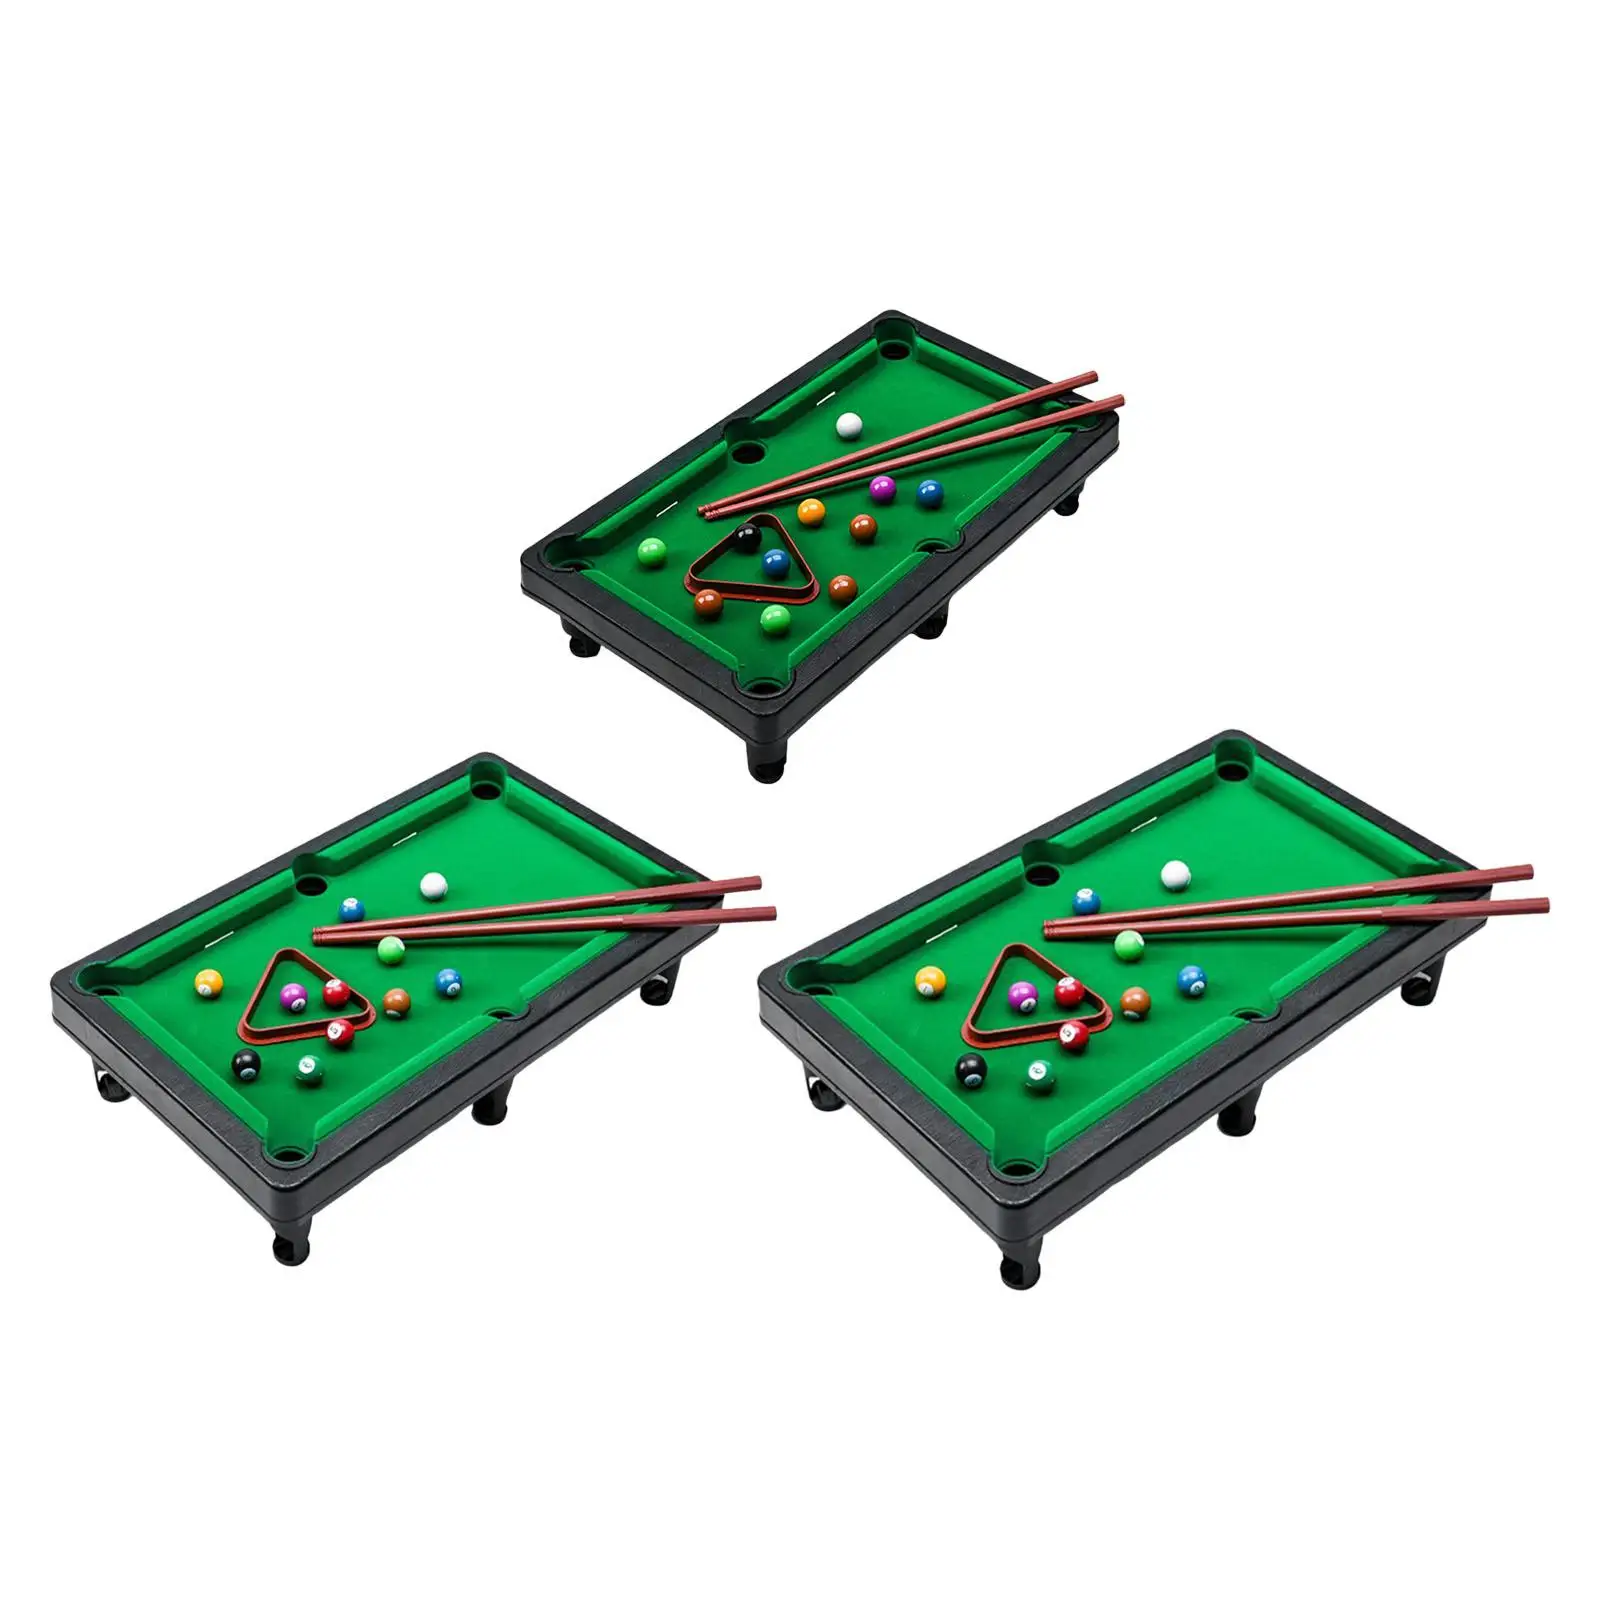 

Portable Mini Table Pool Toy with 2 Sticks Game Balls with Cues Interactive Billiards for Sports Kids Gift